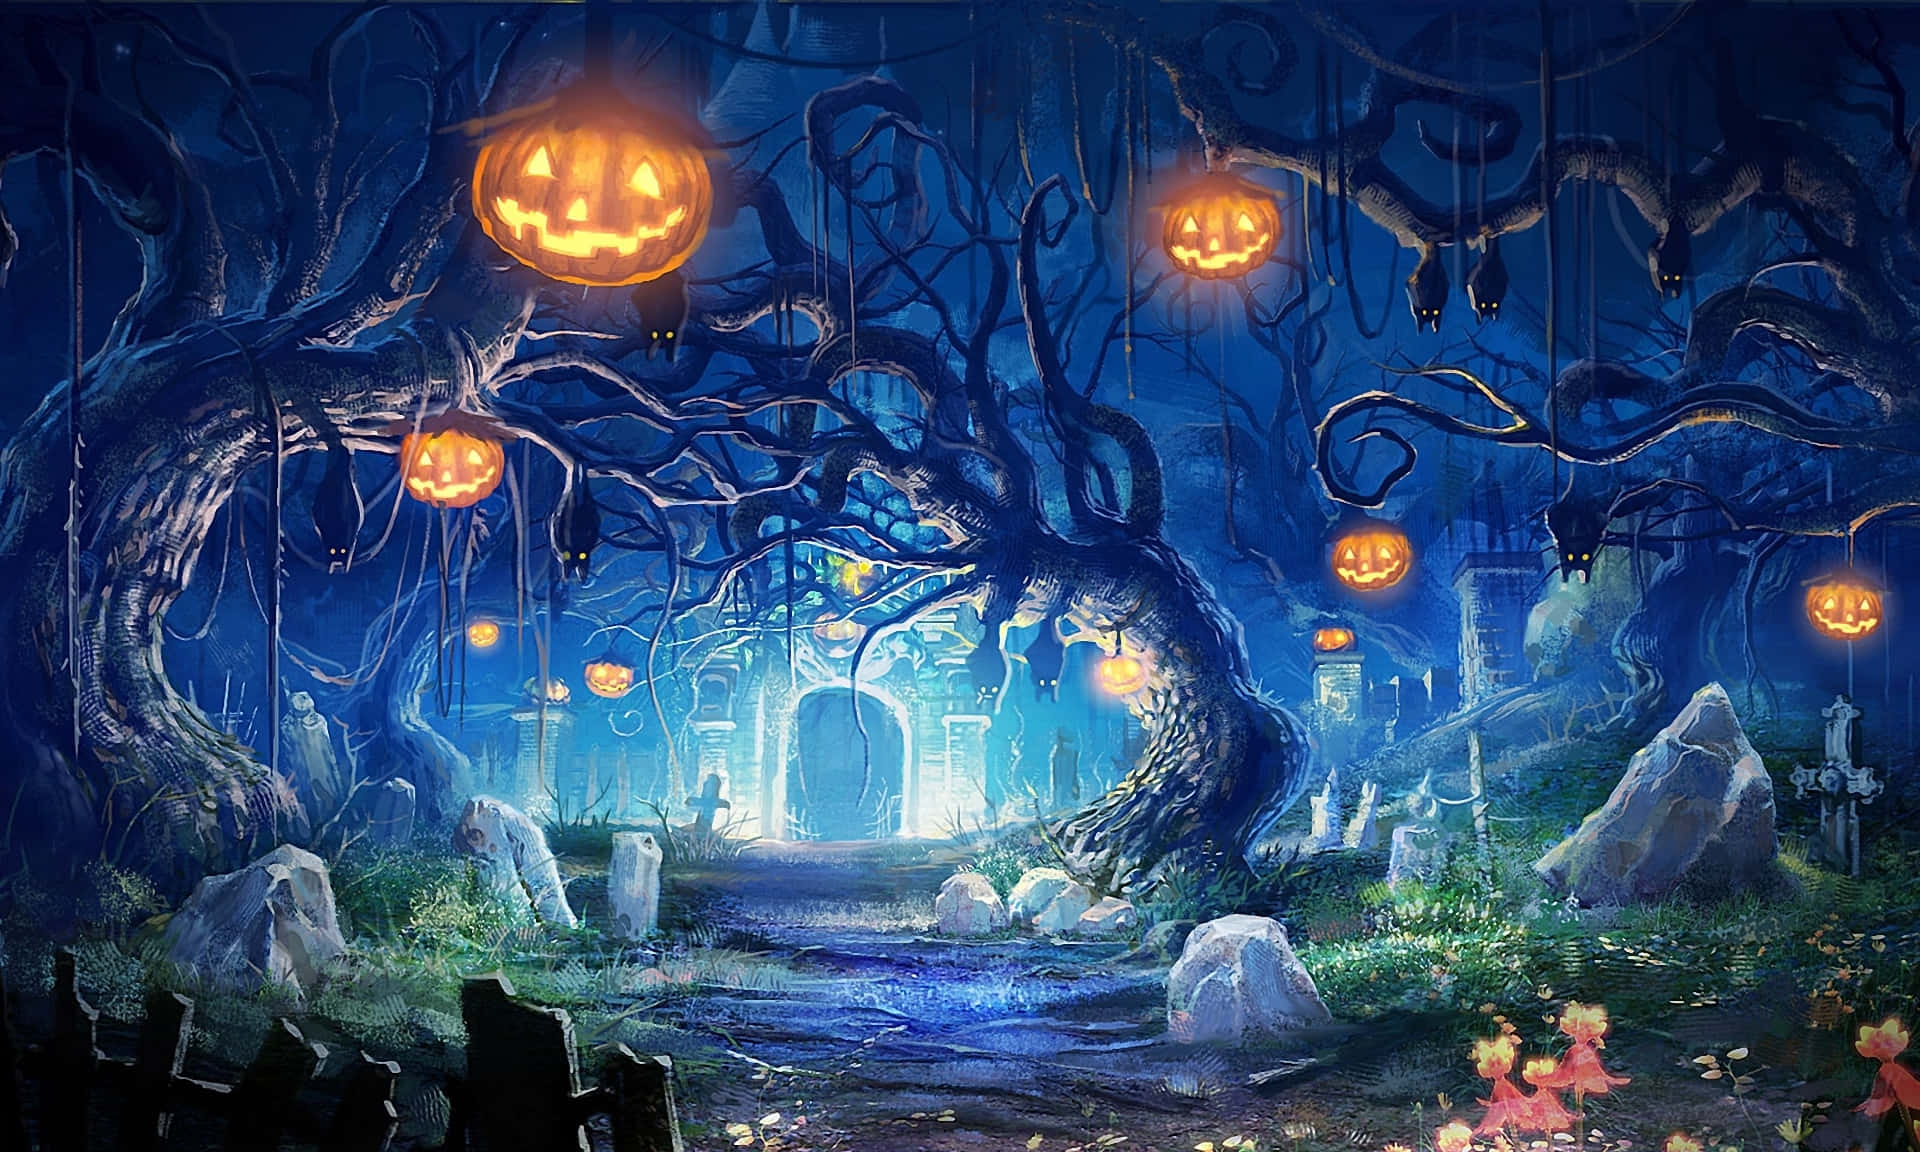 23031-halloween-night-in-the-cemetery-1920x1080-holiday-wallpaper.jpg